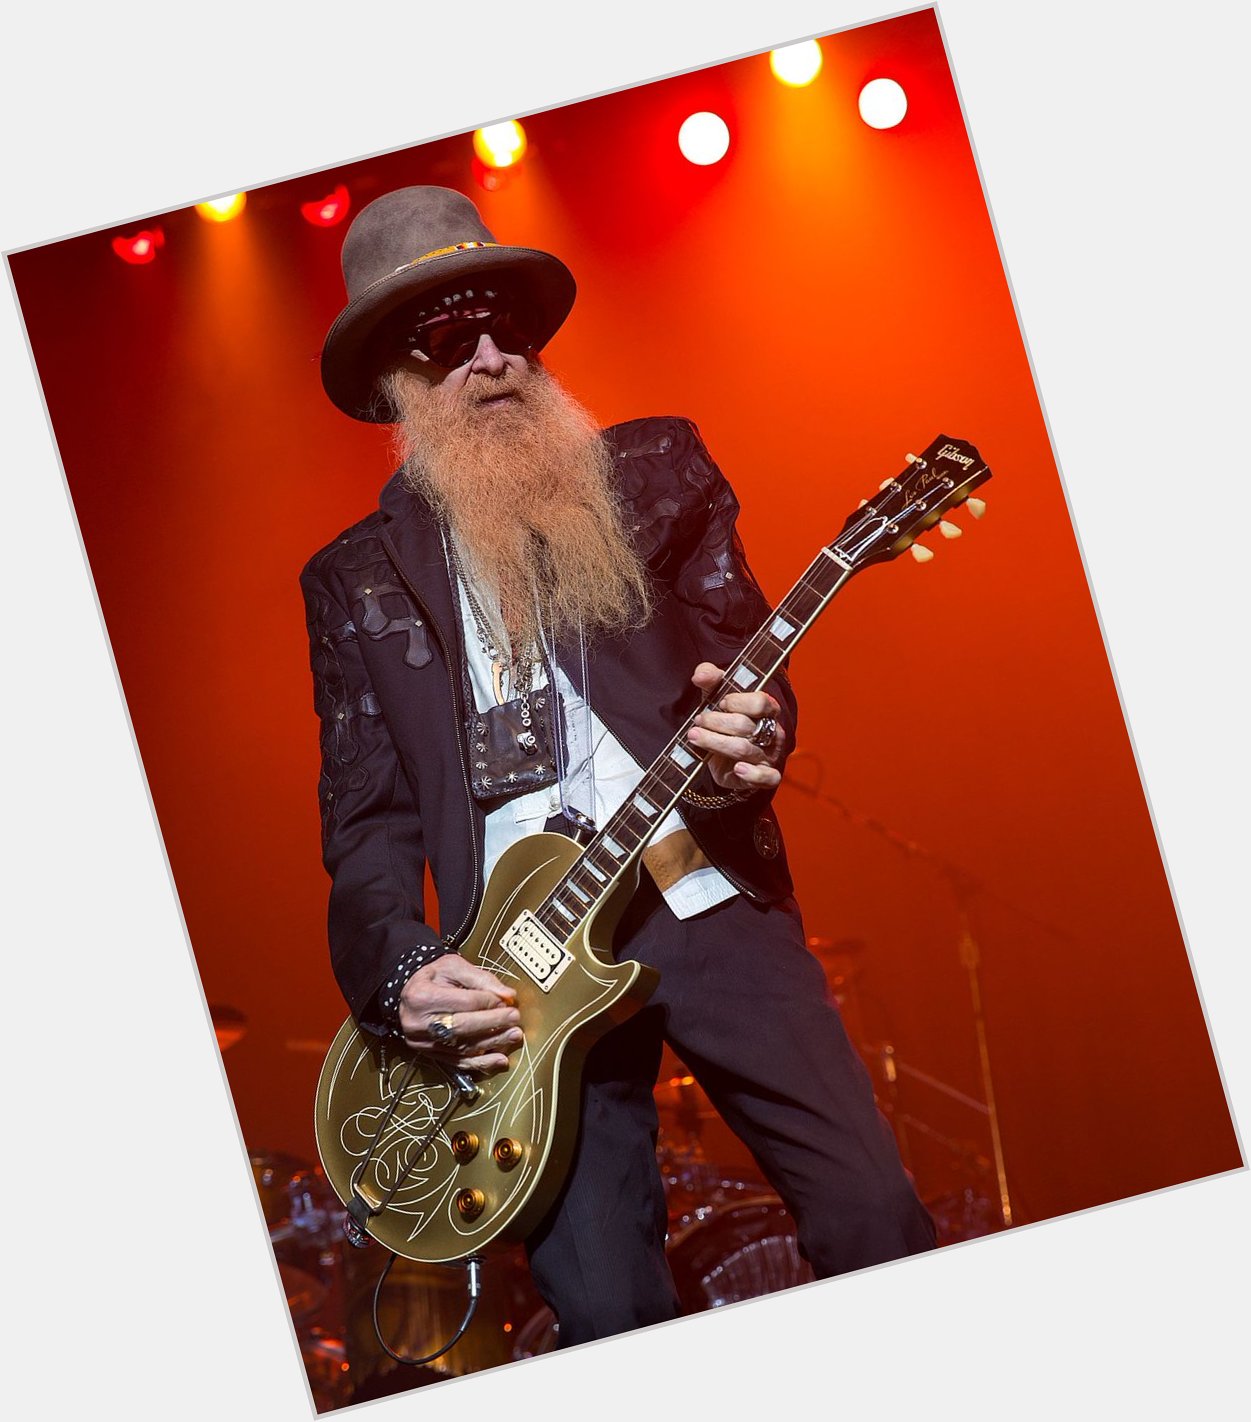 Happy Birthday to Billy Gibbons who turns 68 today! 